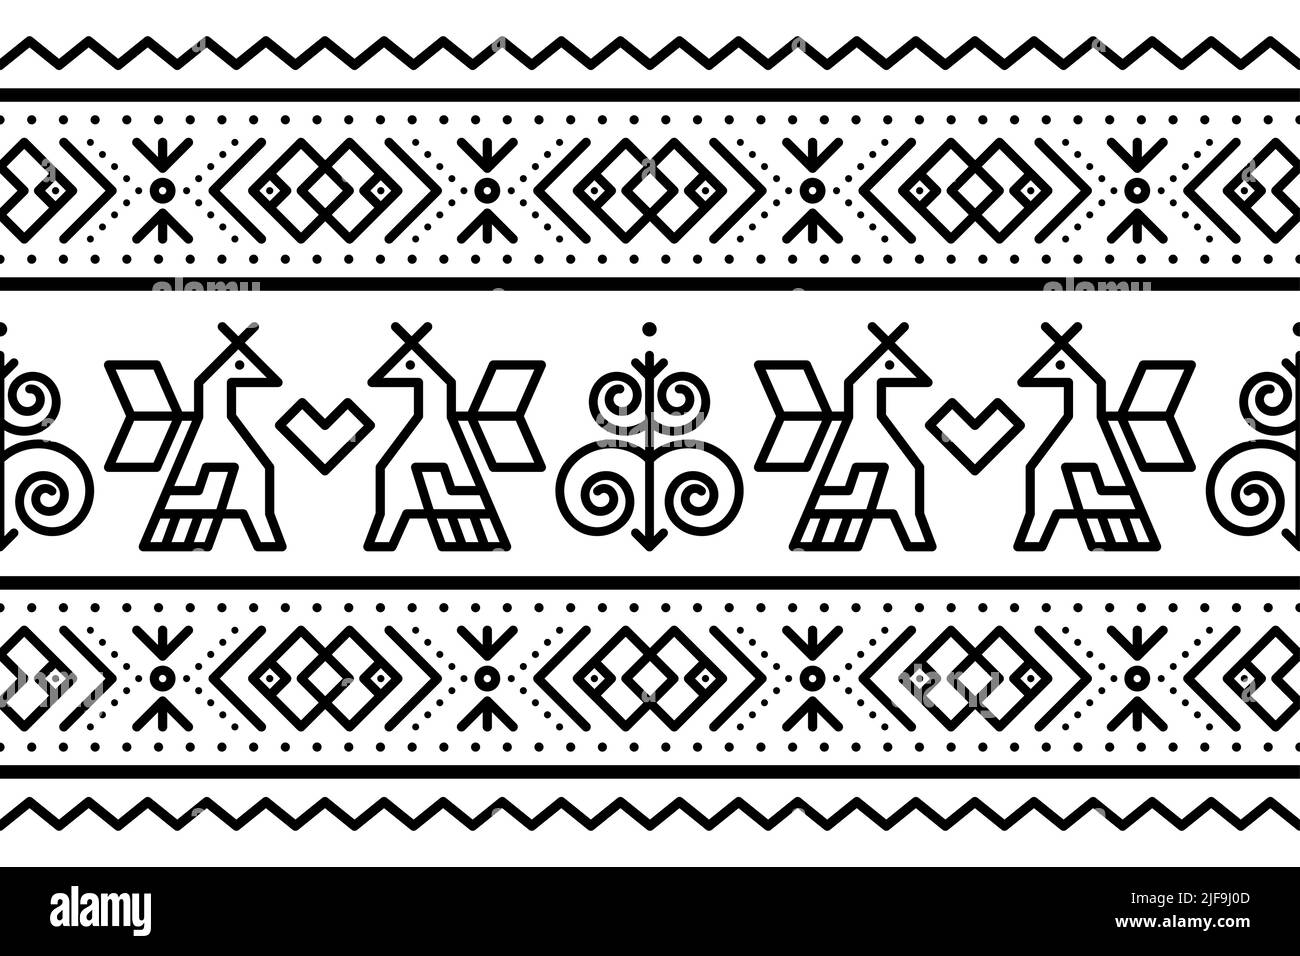 Slovak tribal folk art vector seamless geometric pattern with brids and swirls - long horizontal deisgn inspired by traditional painted art from villa Stock Vector